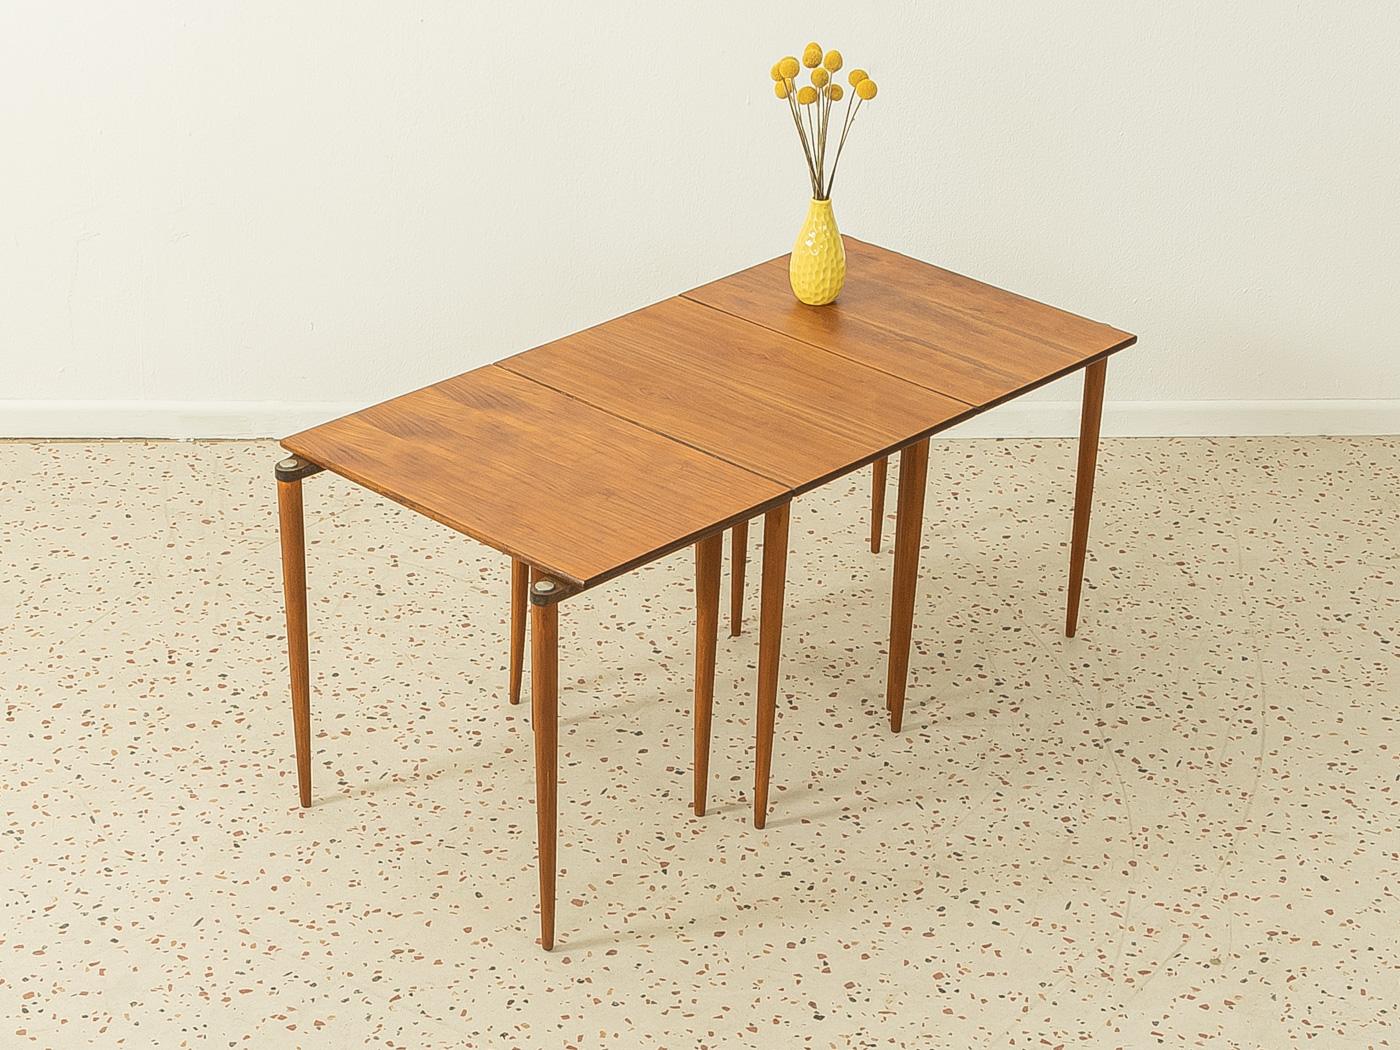 Rare nesting tables from the 1960s. High-quality solid walnut frame and table top in walnut veneer.

Quality features:
- Very good workmanship
- High-quality materials
- Made in Germany, manufacturer: Opal Möbel (Branding on the frame)